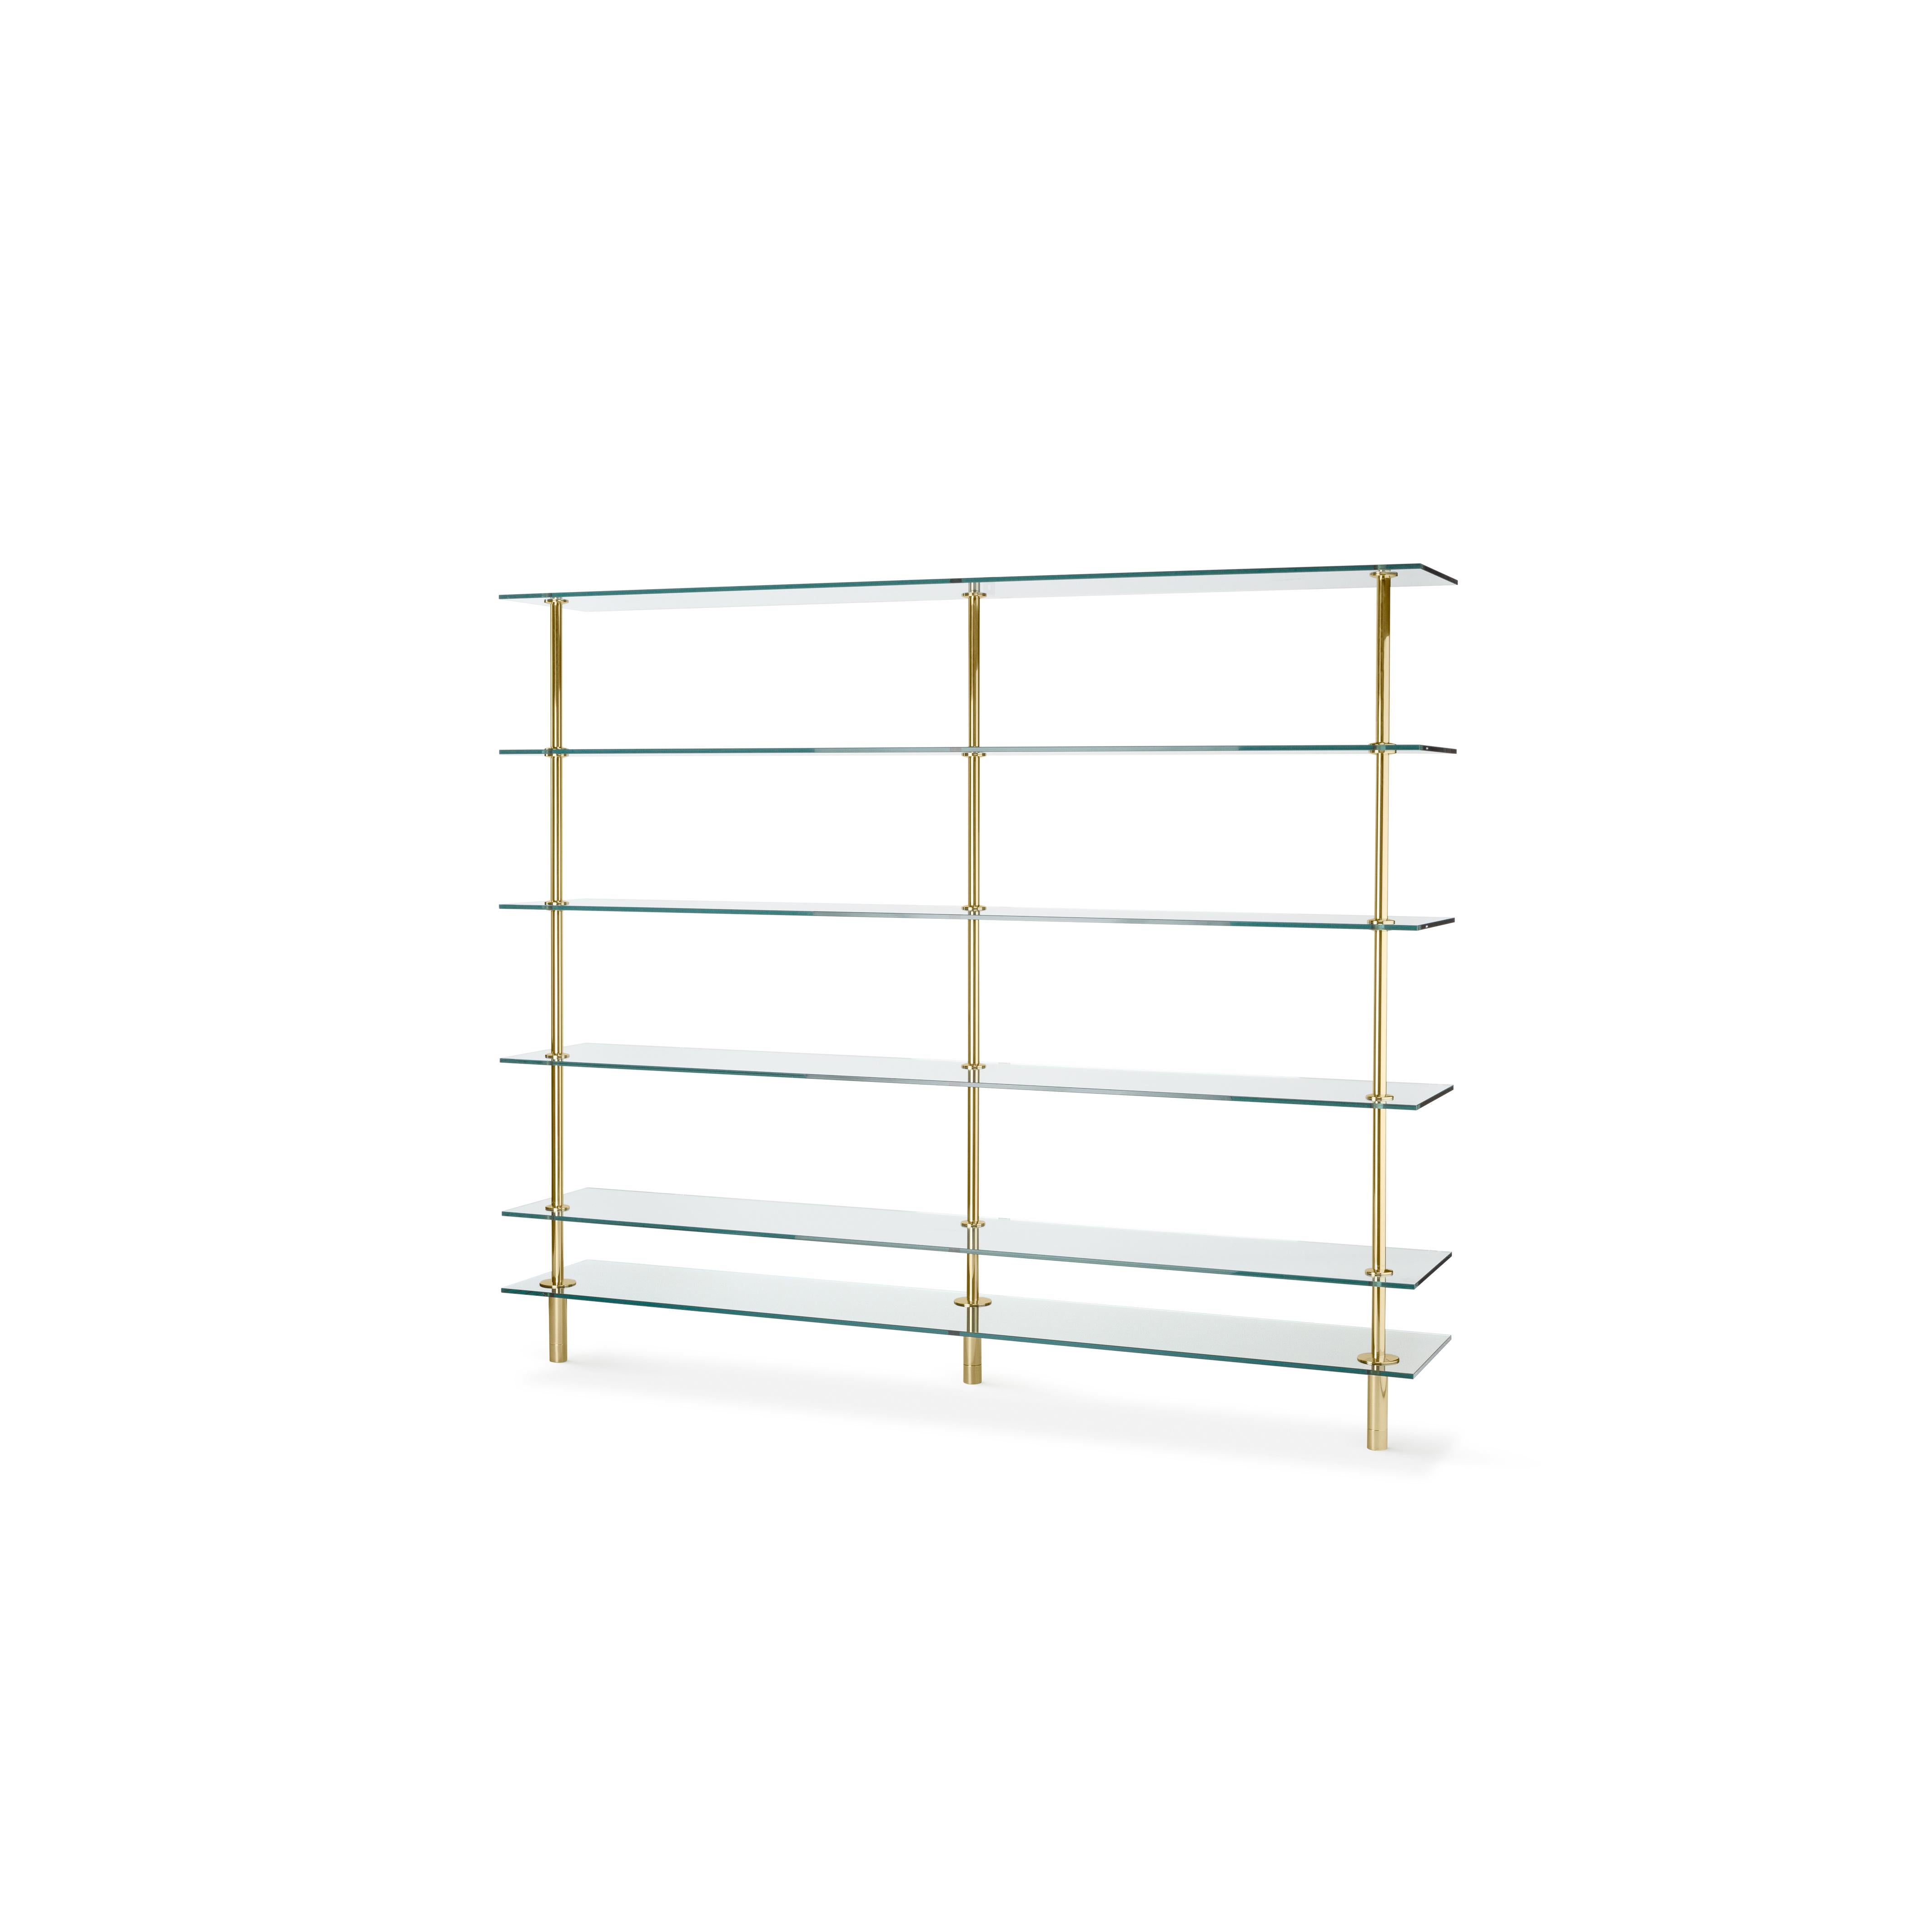 Bookshelves in crystal and brass.
The designer imagines a turning point in the use of such a precious finishes such as polished brass: from the idea of almost a unique object in its perfect craftsmanship, to the system to be built starting from the